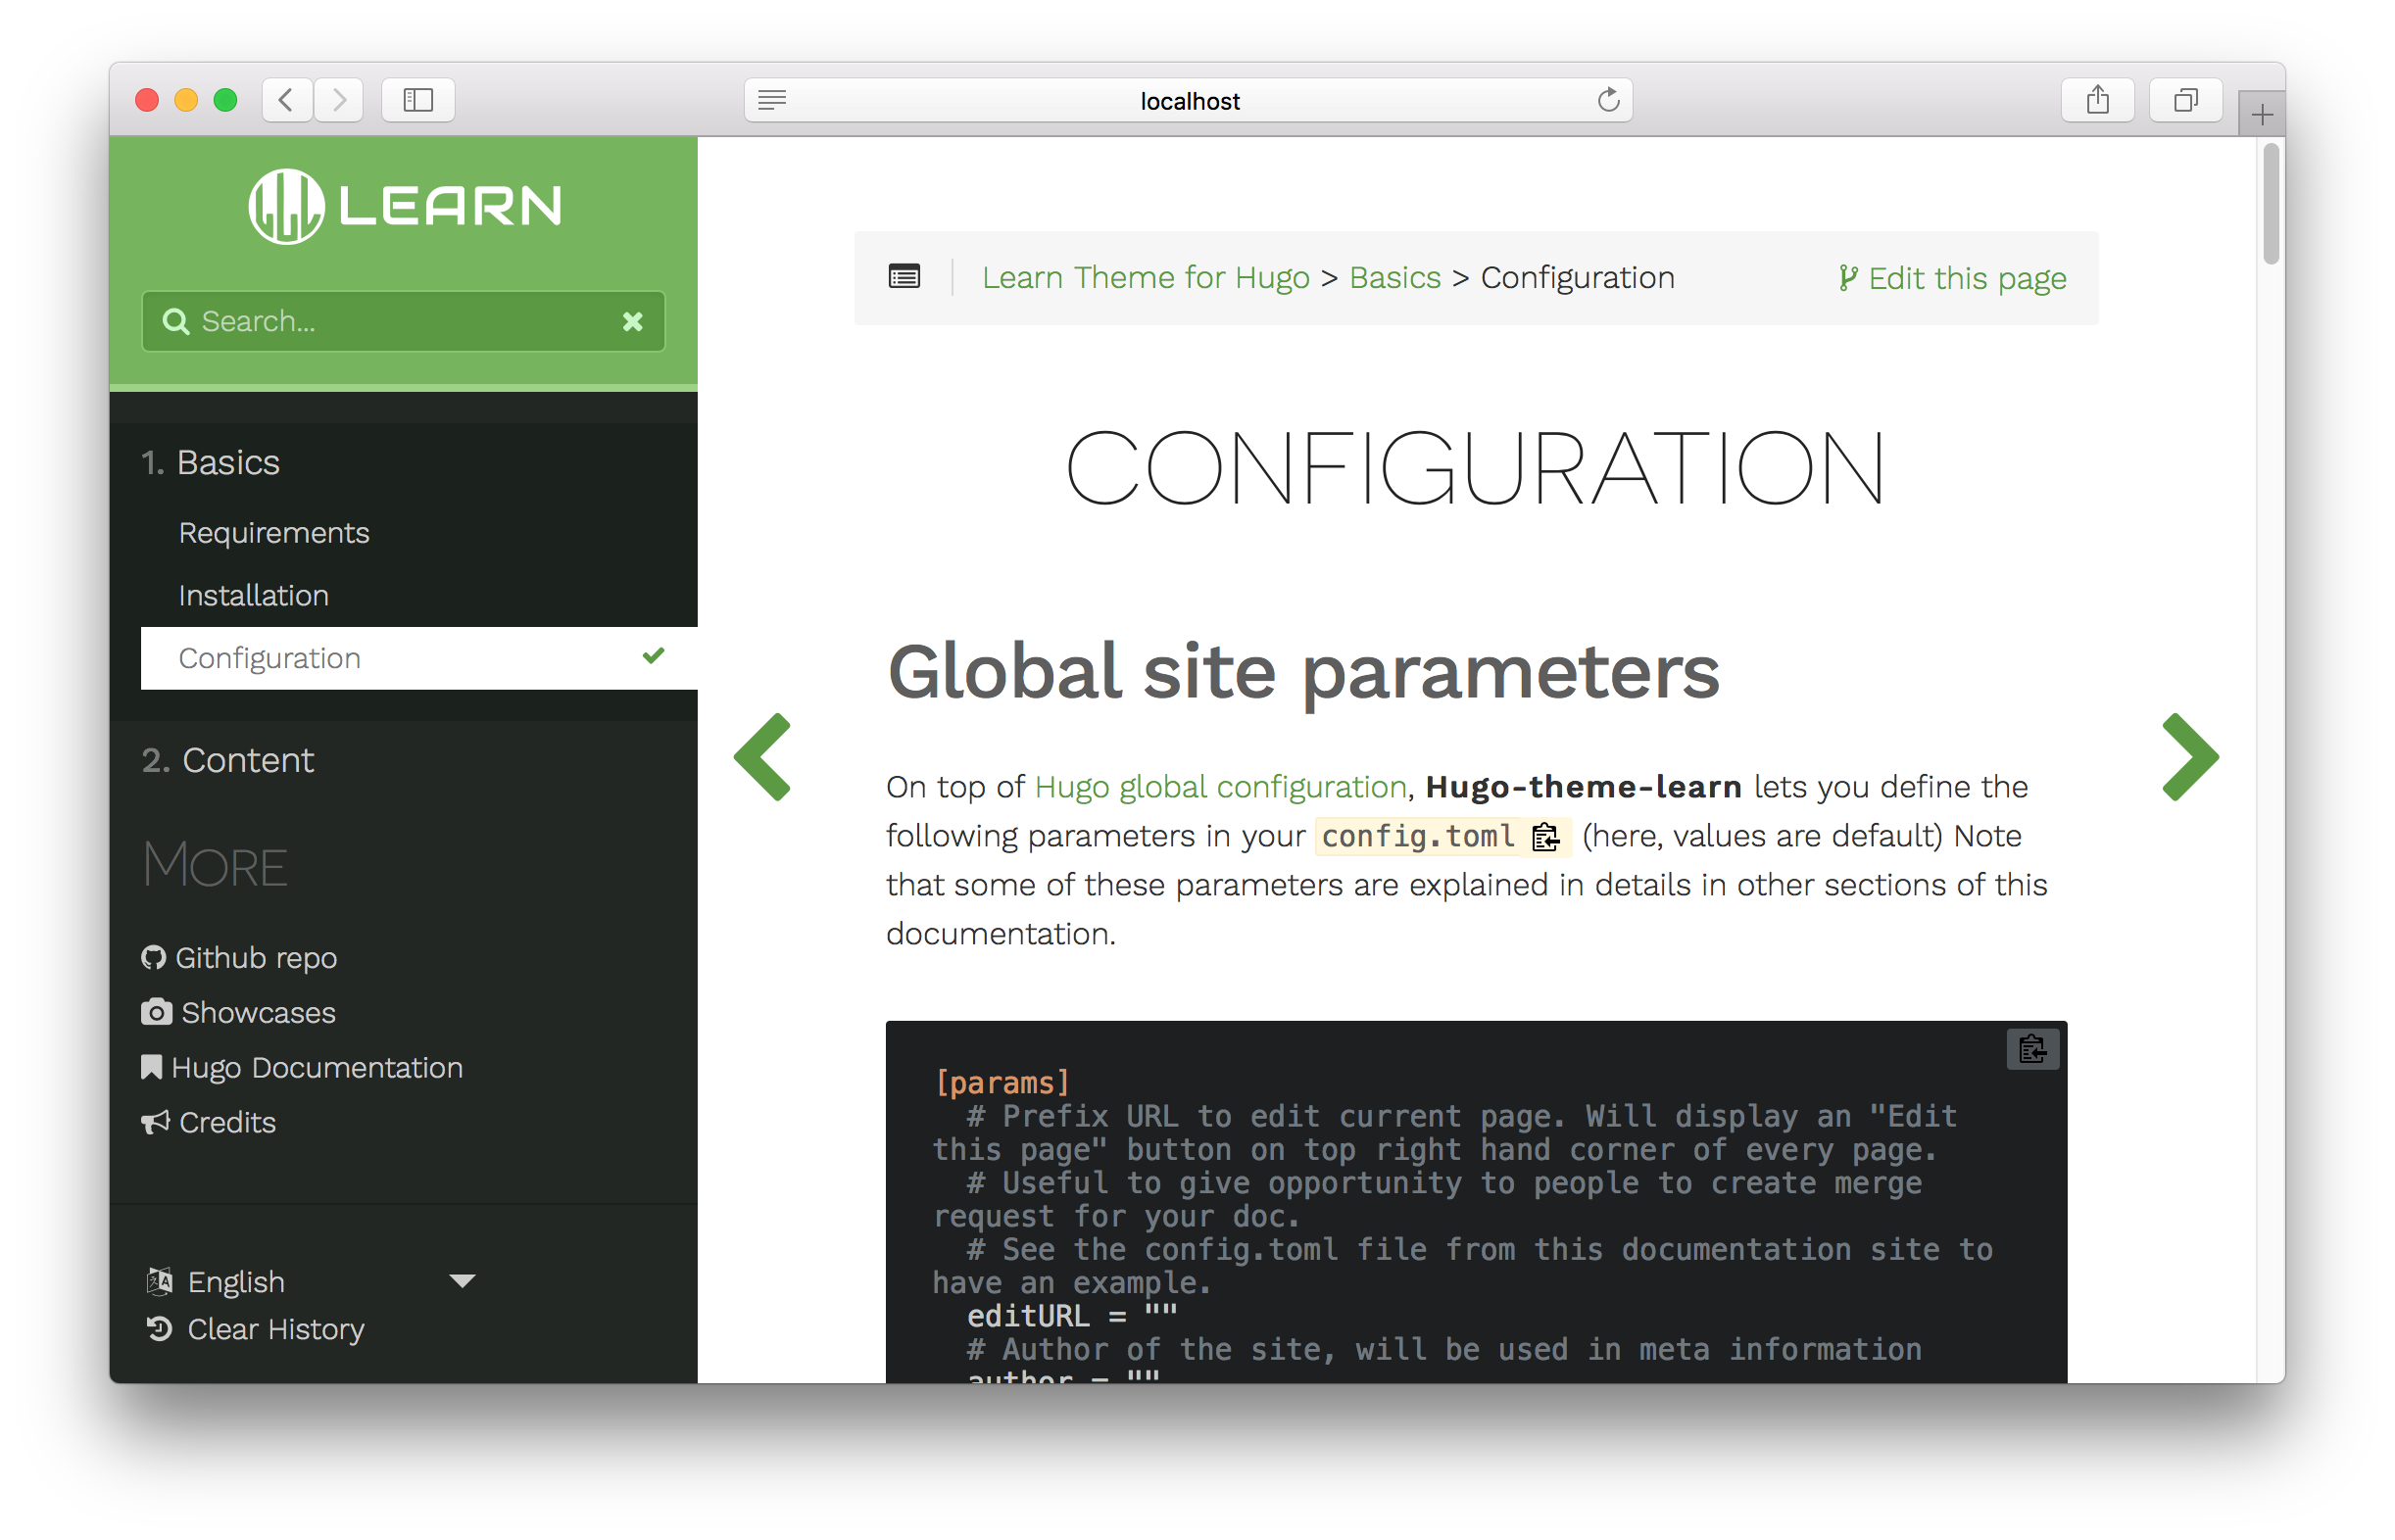 docs/blog/themes/hugo-theme-learn/exampleSite/content/basics/style-customization/images/green-variant.png